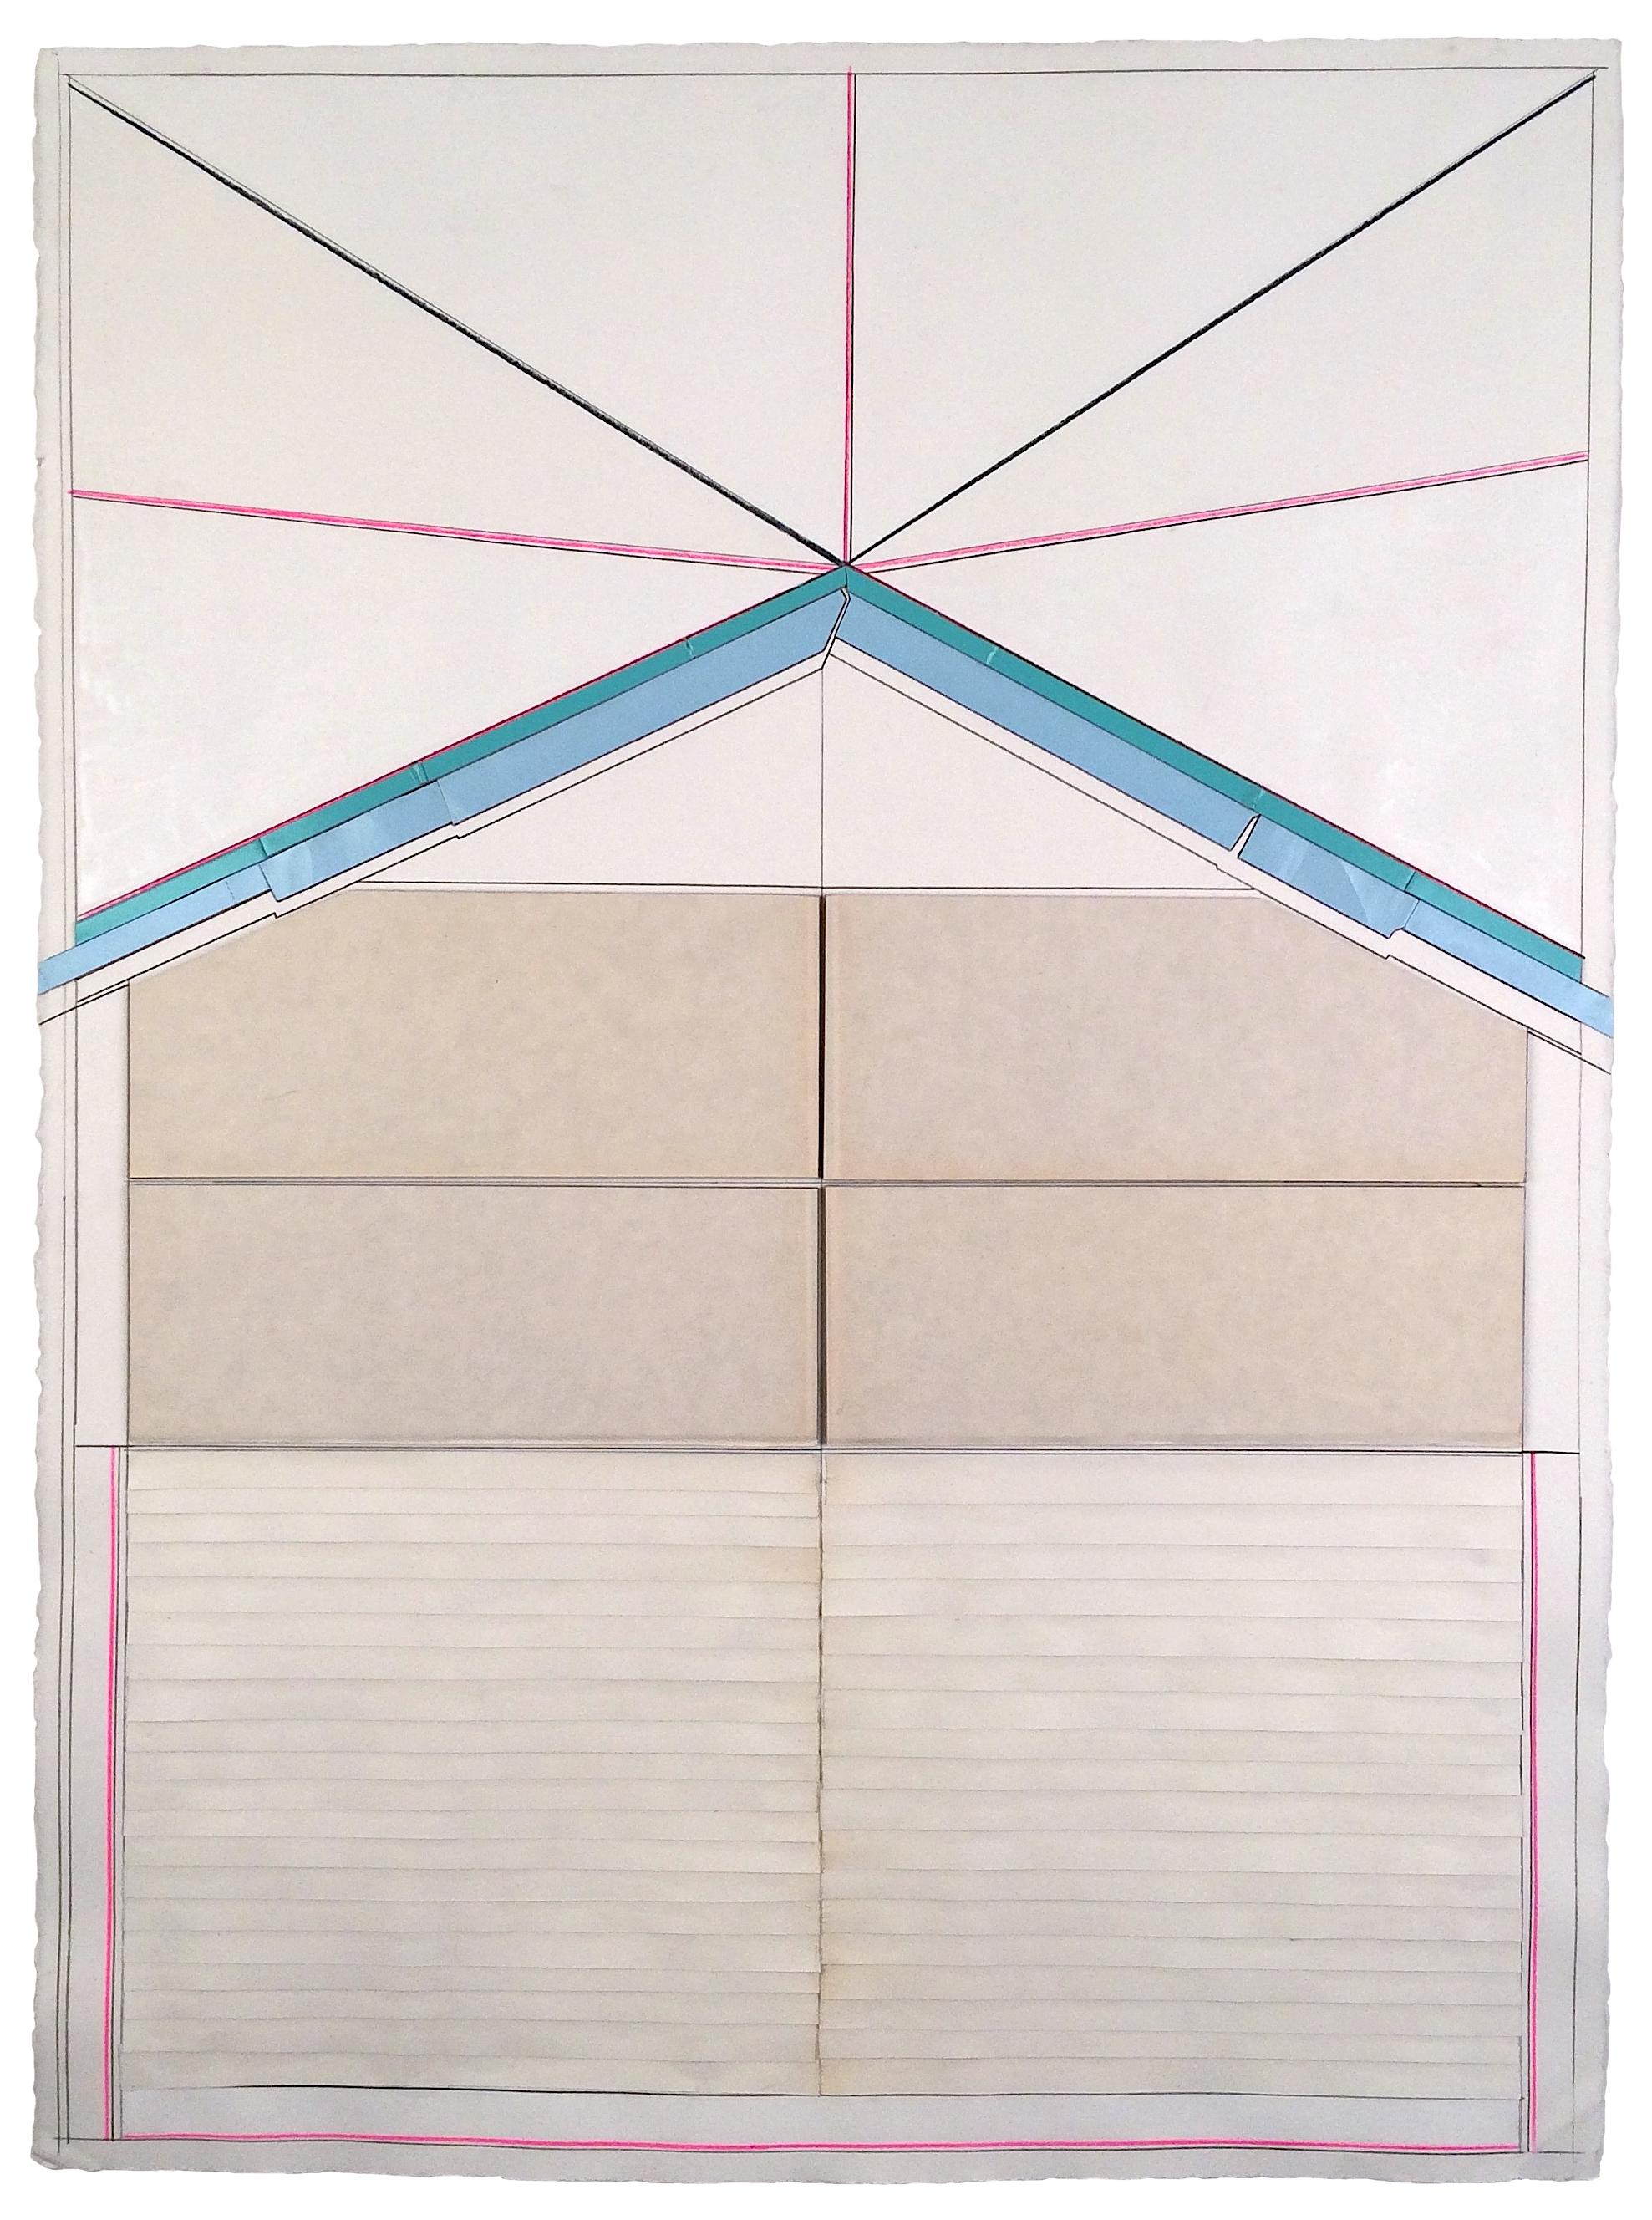 Ryan Sarah Murphy Abstract Sculpture - “Once in a Certain Way”, tan, white, and blue collaged architectural wall relief